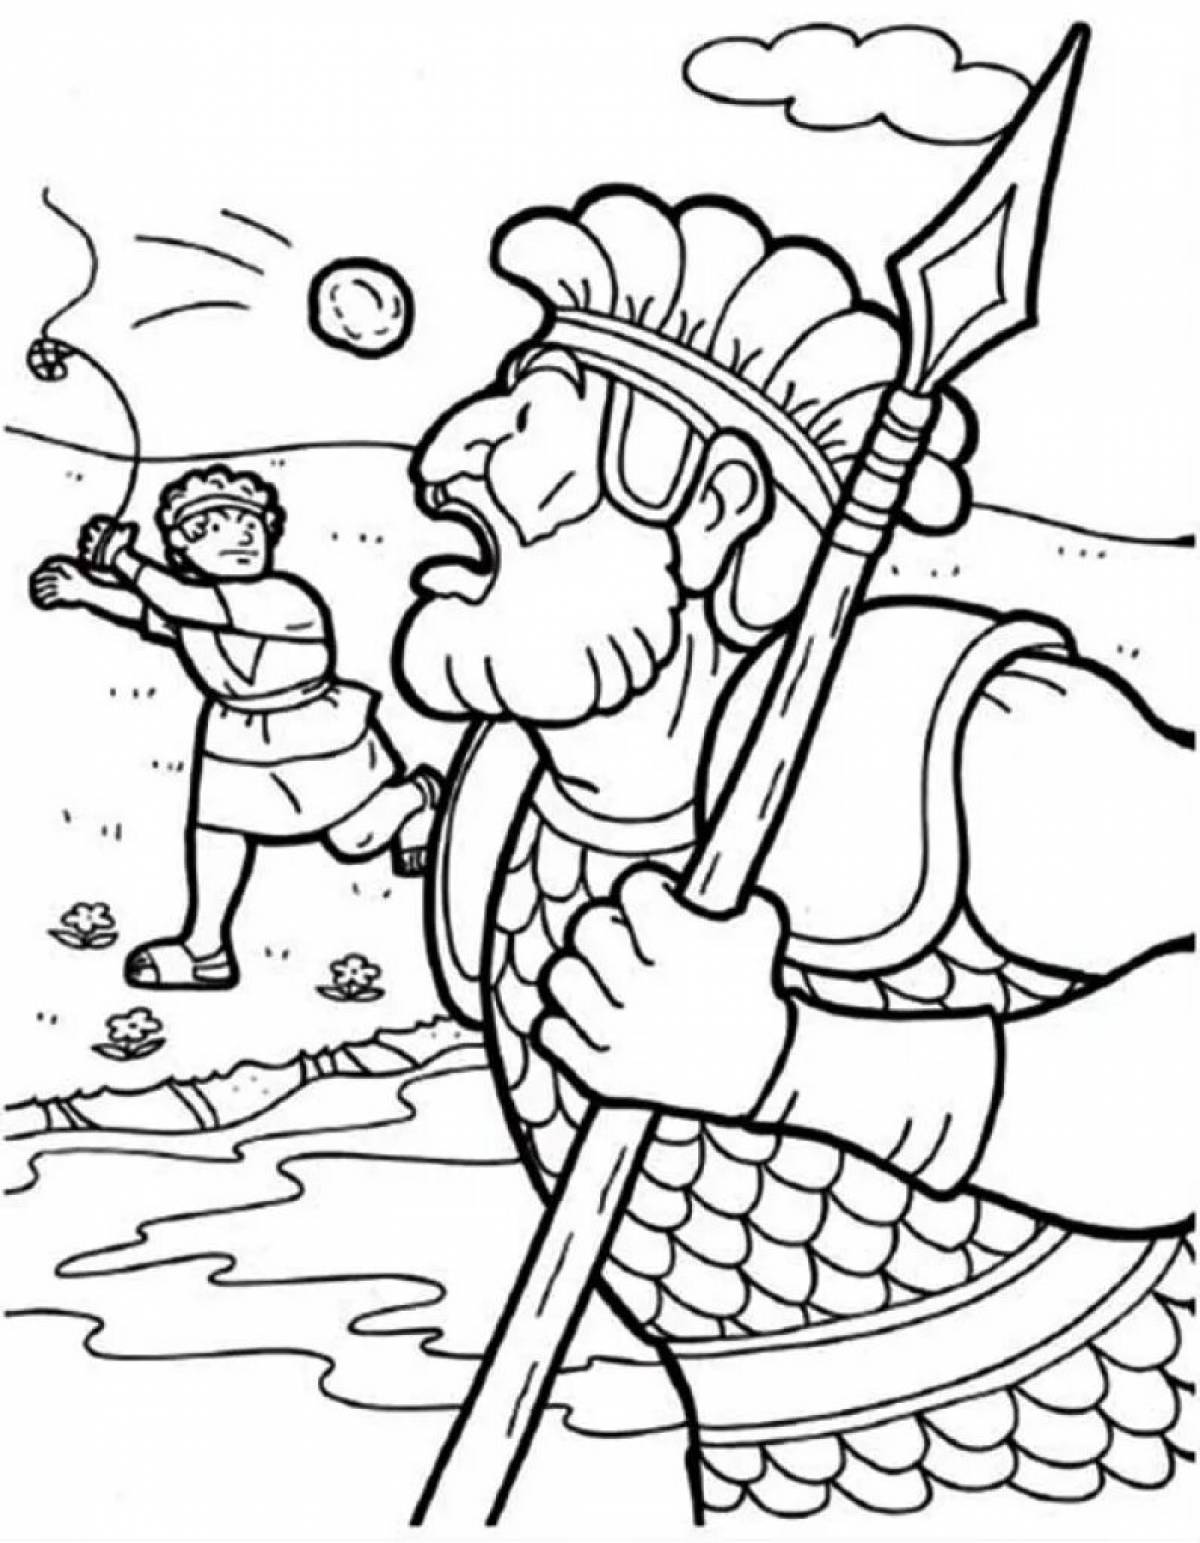 Living david and goliath coloring book